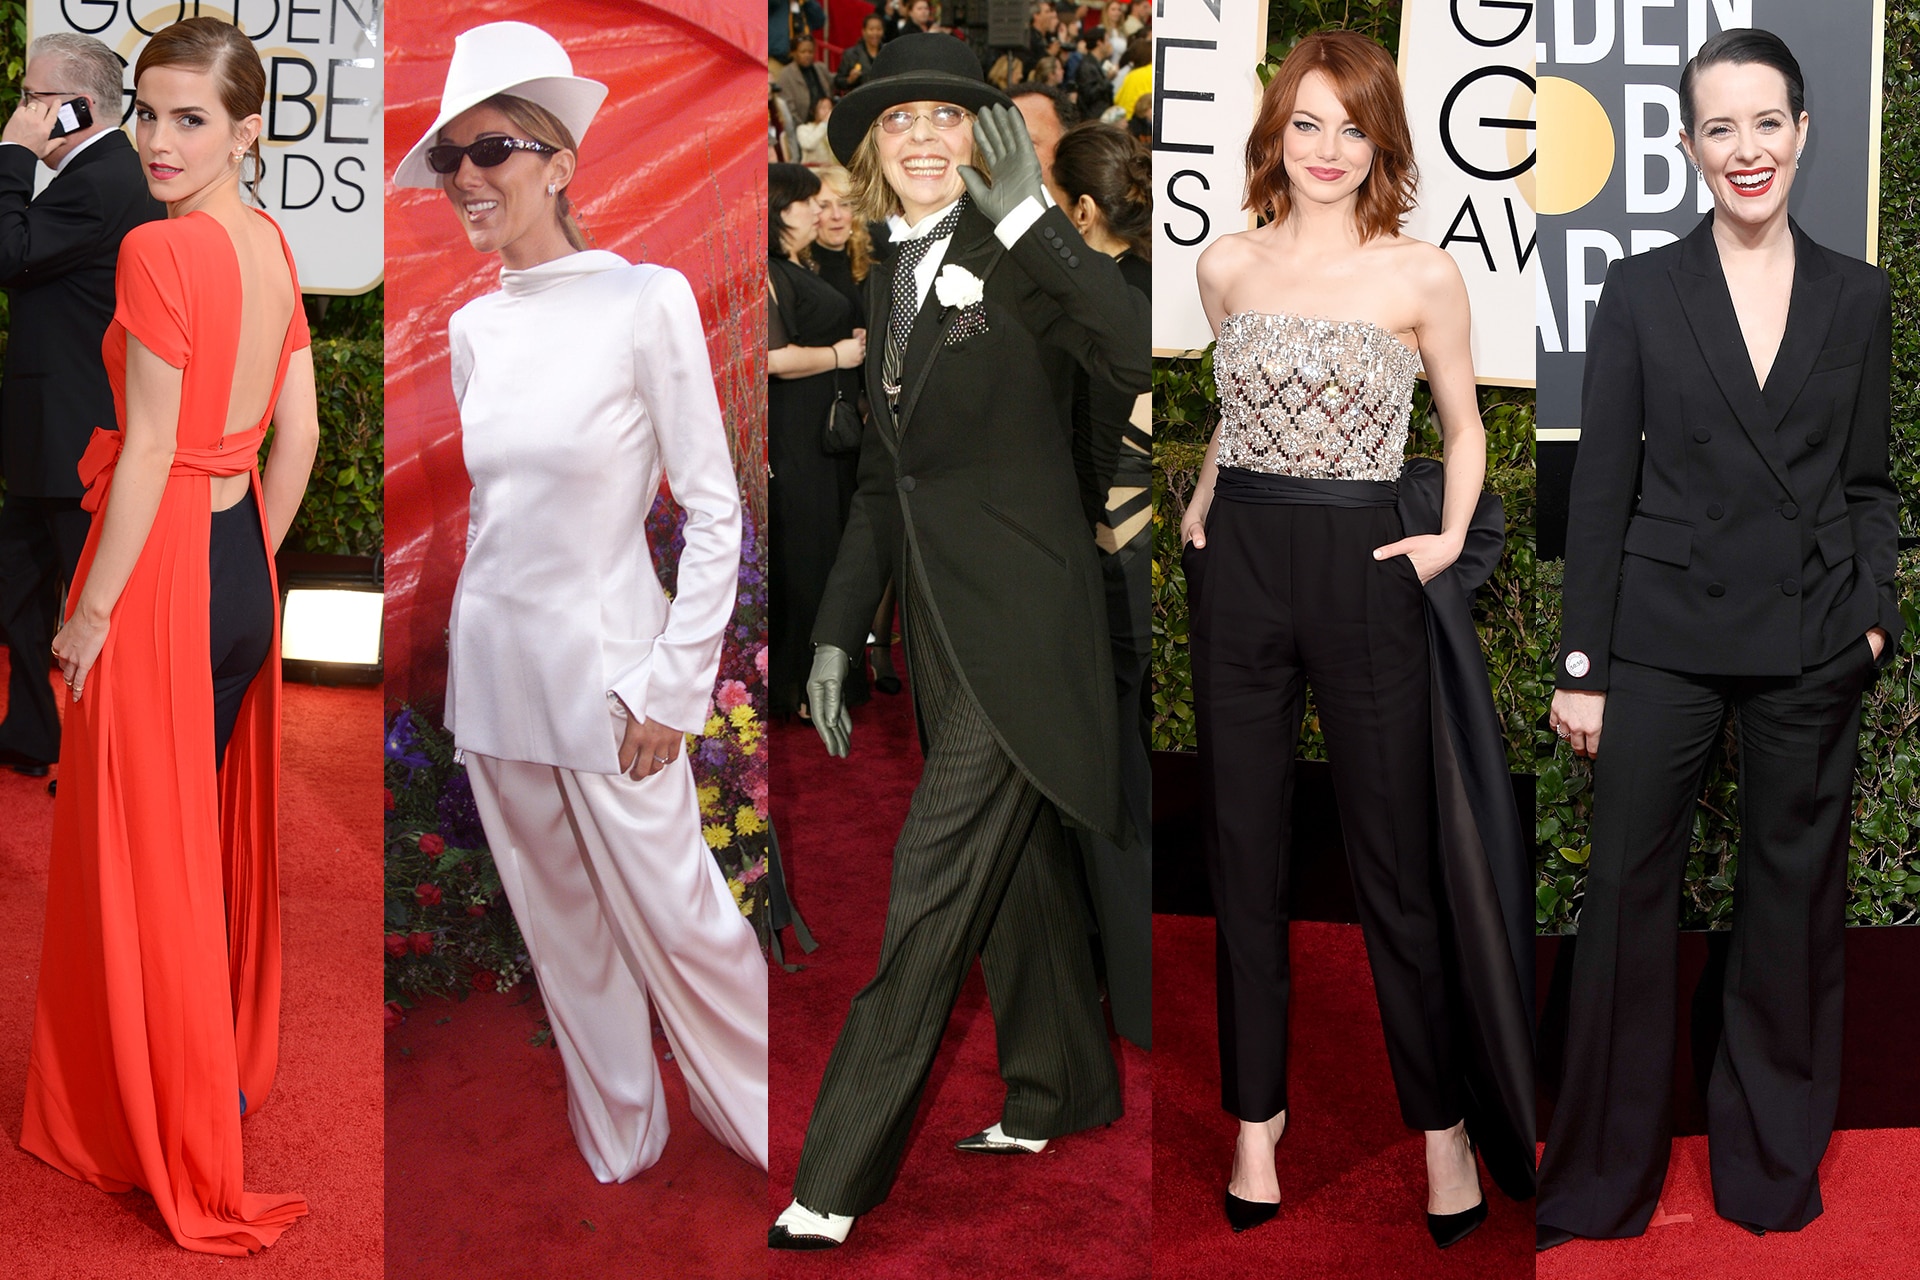 Pants on the red carpet: why more women wear dresses - Vogue Australia